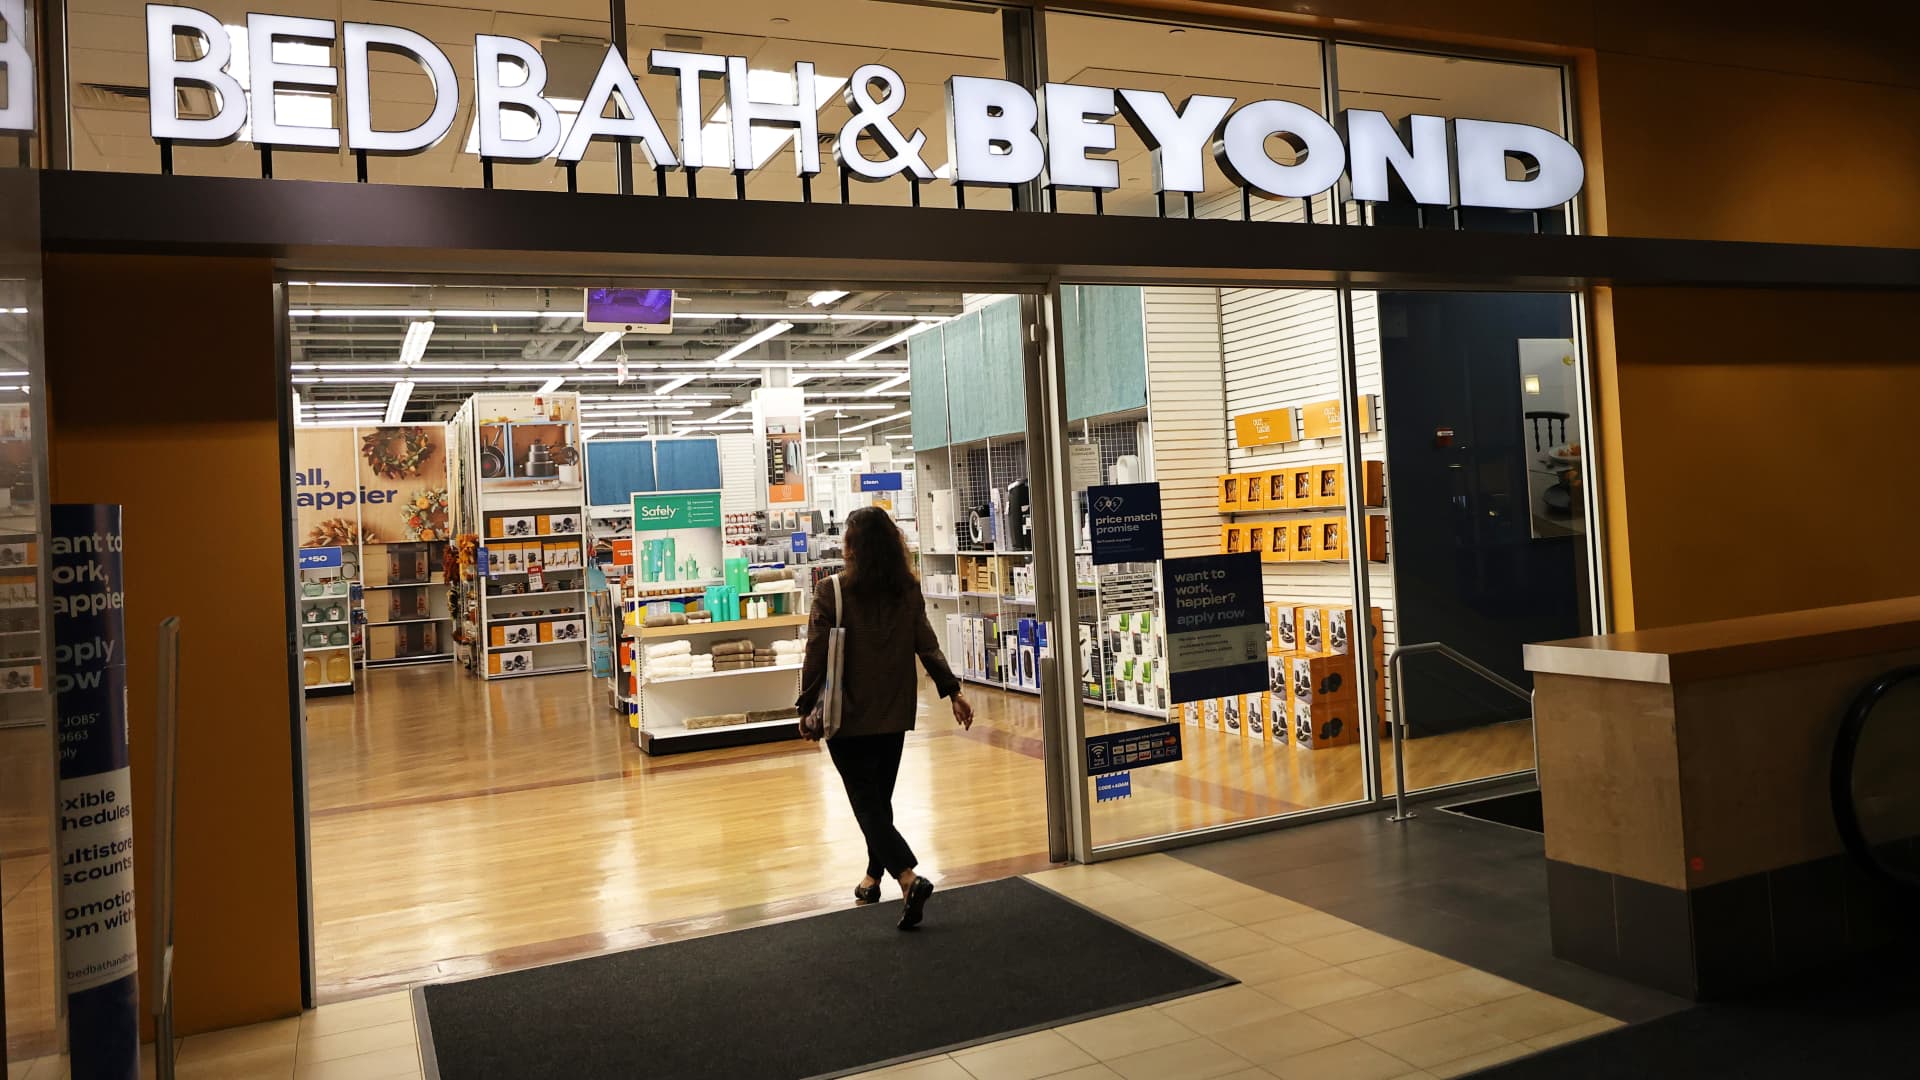 Bed Bath & Beyond is discontinuing a private brand as it tries to reverse declining sales